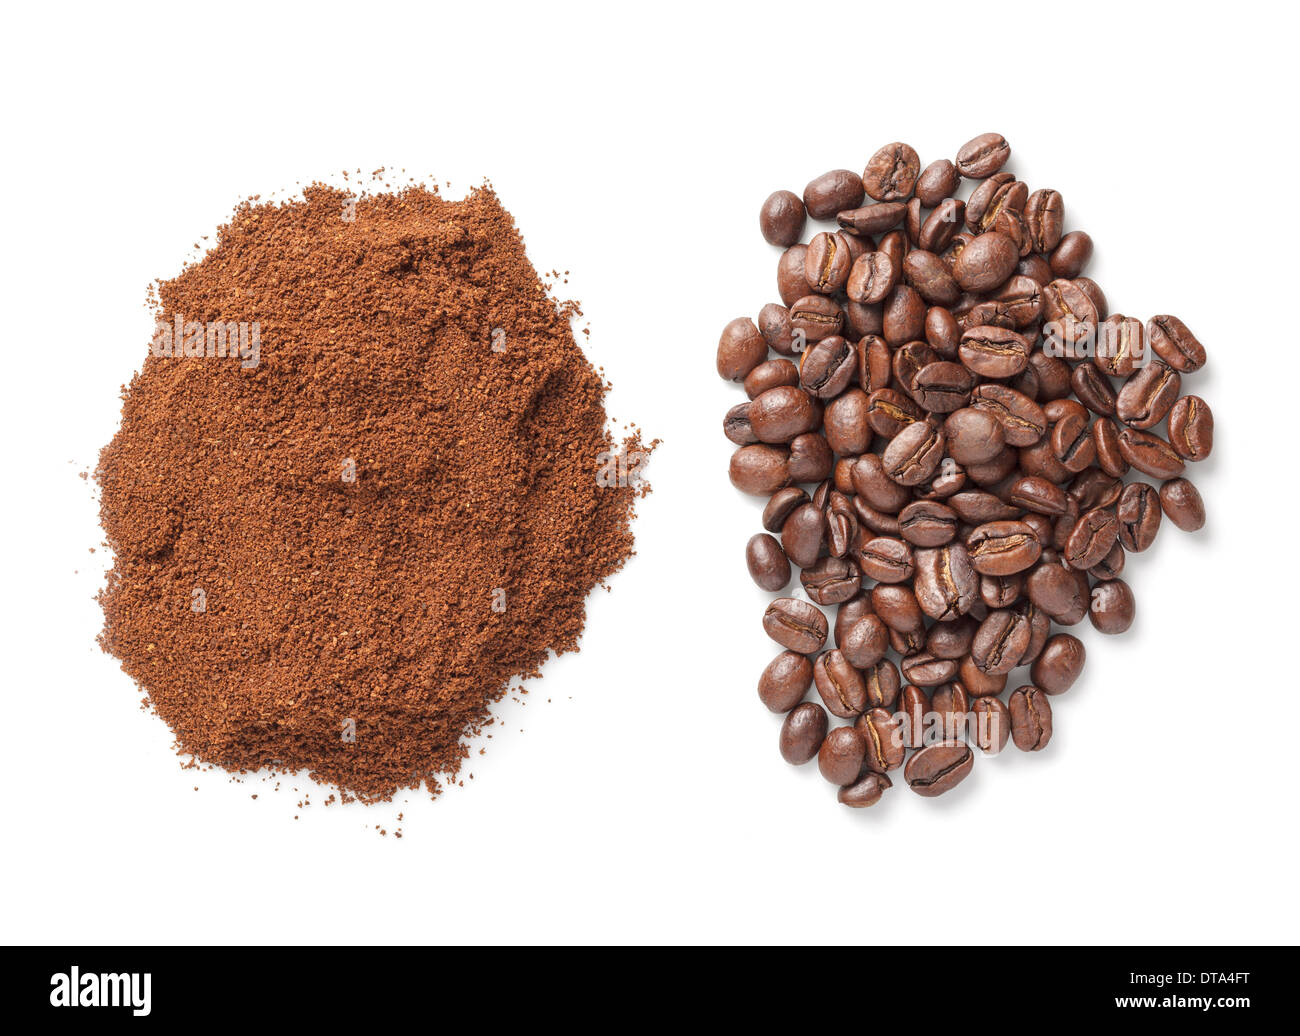 Coffee Beans and ground coffee Stock Photo